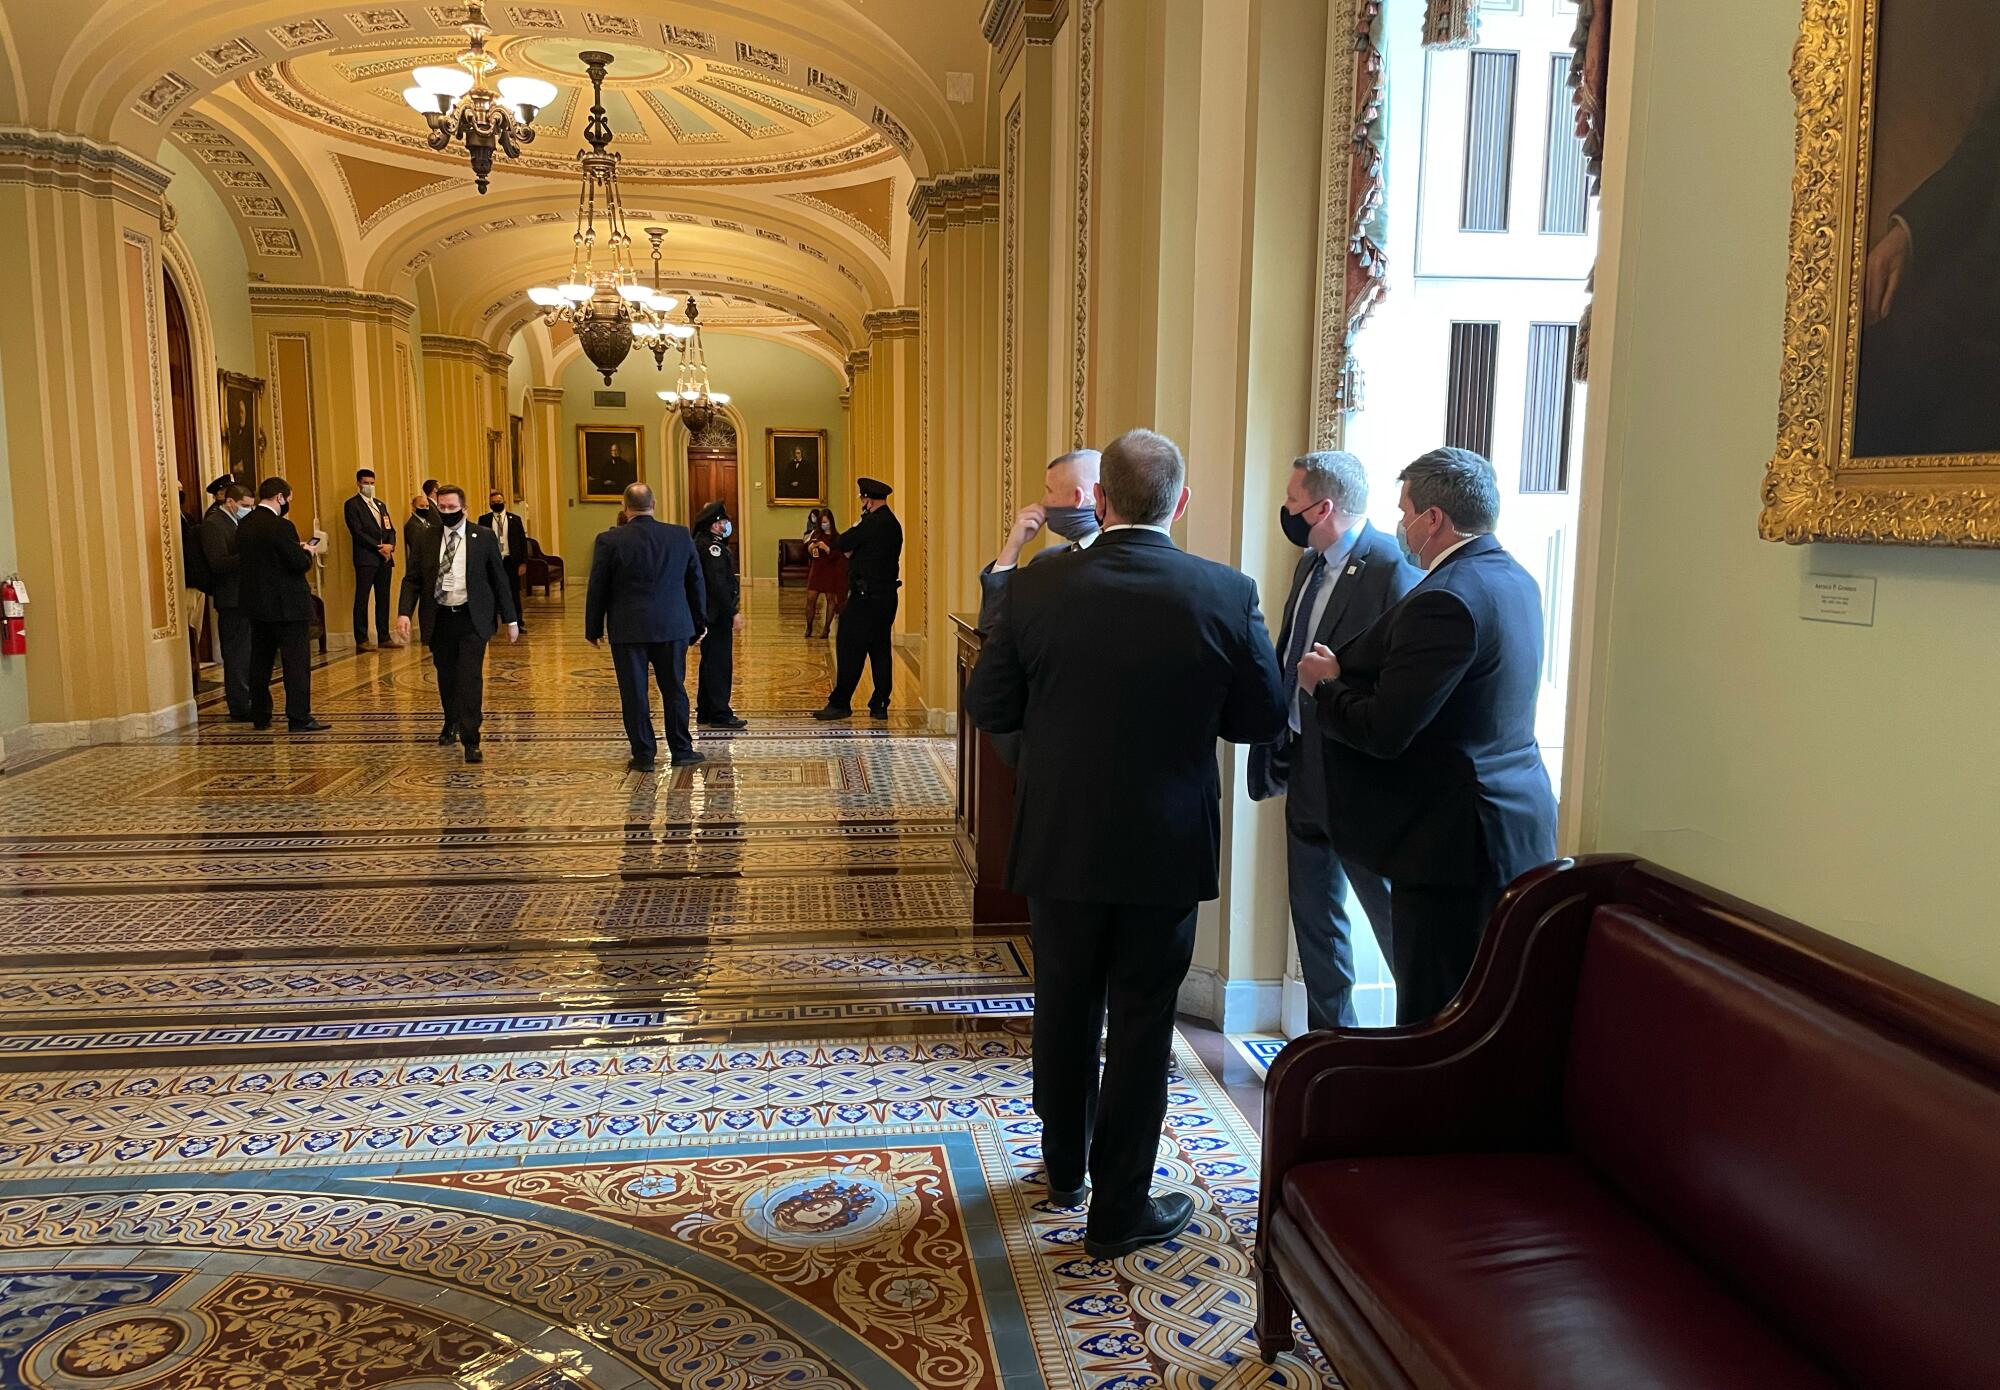 Former Vice President Mike Pence's Secret Service detail speak in a Capitol hallway